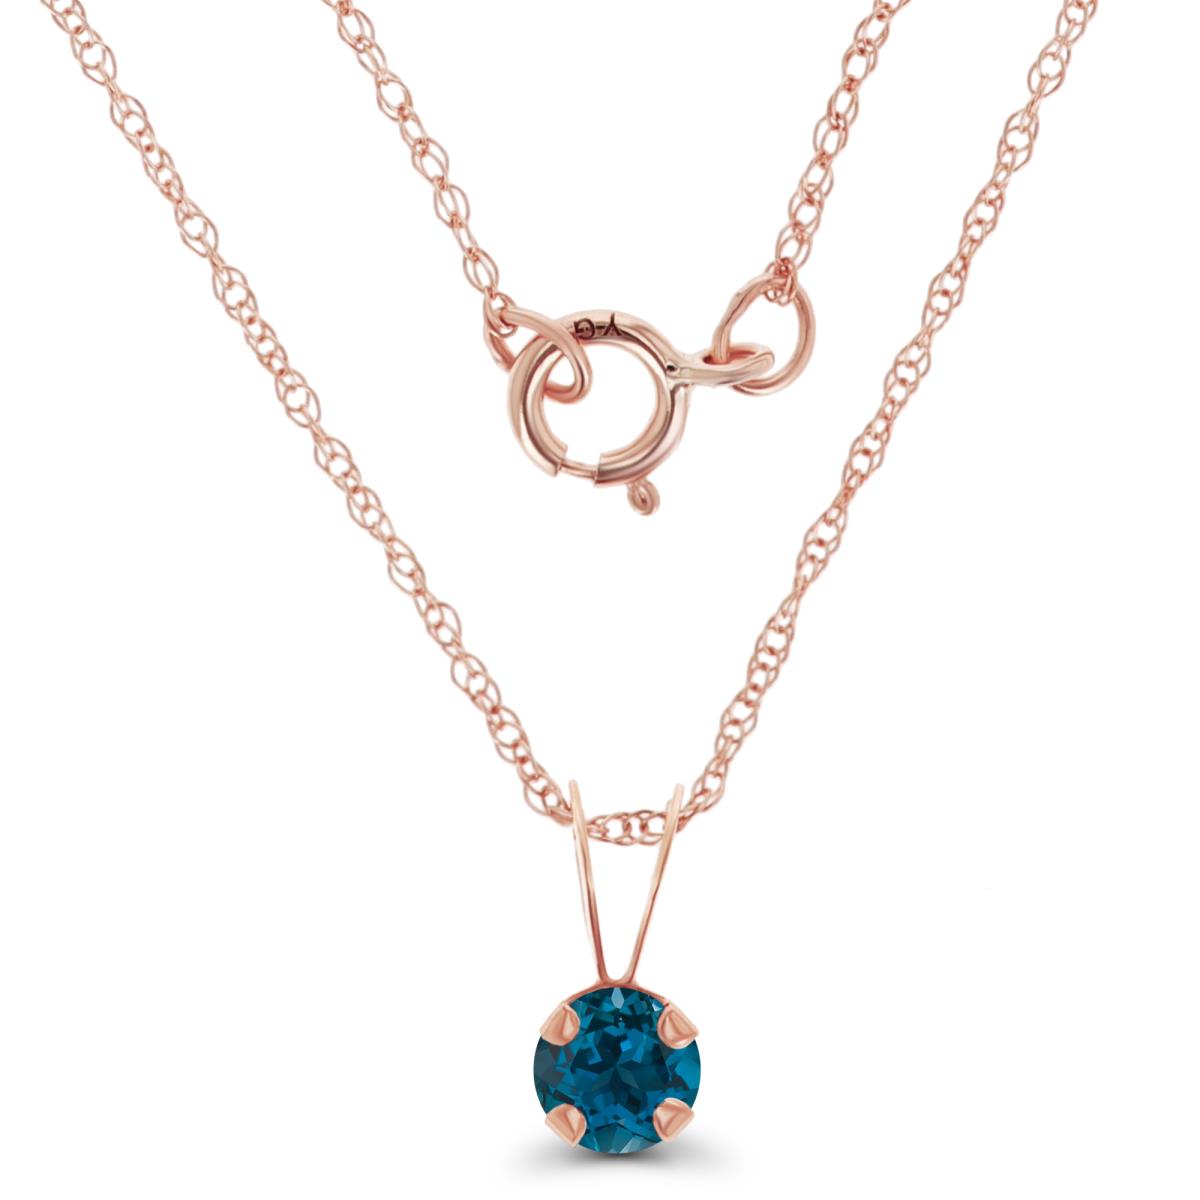 14K Rose Gold 4mm Round London Blue Topaz 18" Rope Chain Necklace